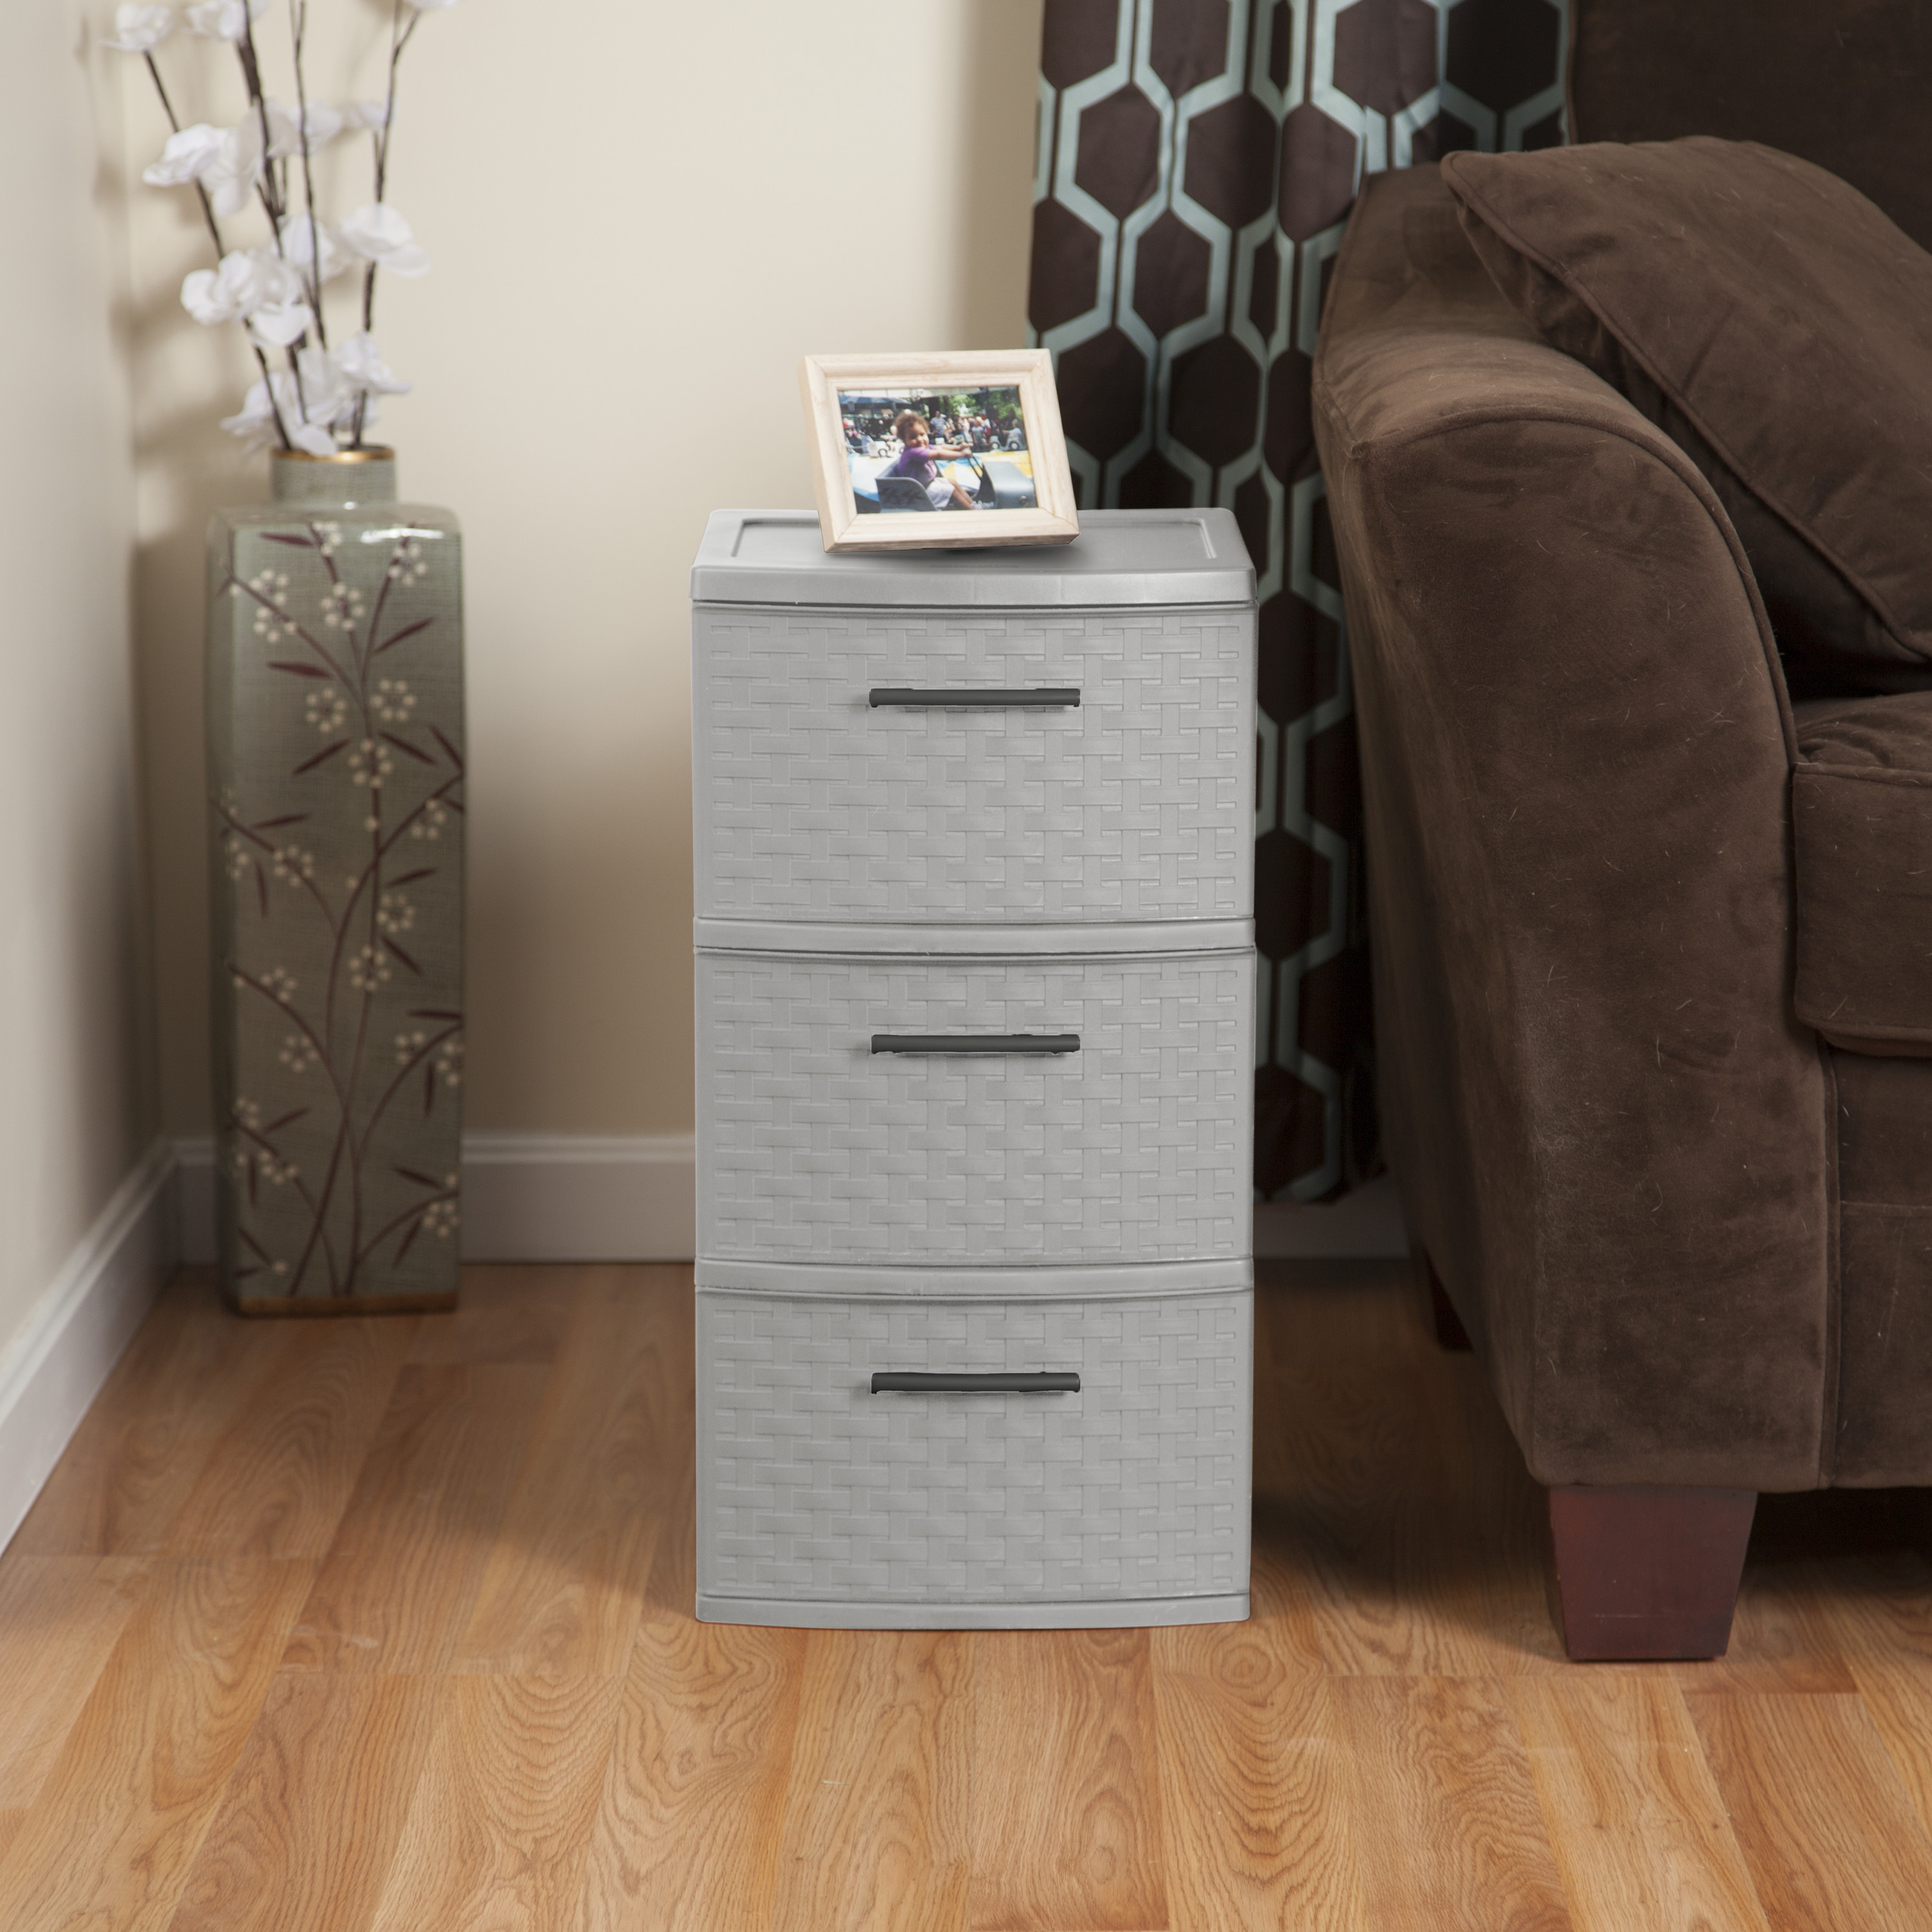 Sterilite 3 Drawer Weave Tower Plastic, Cement - image 4 of 8